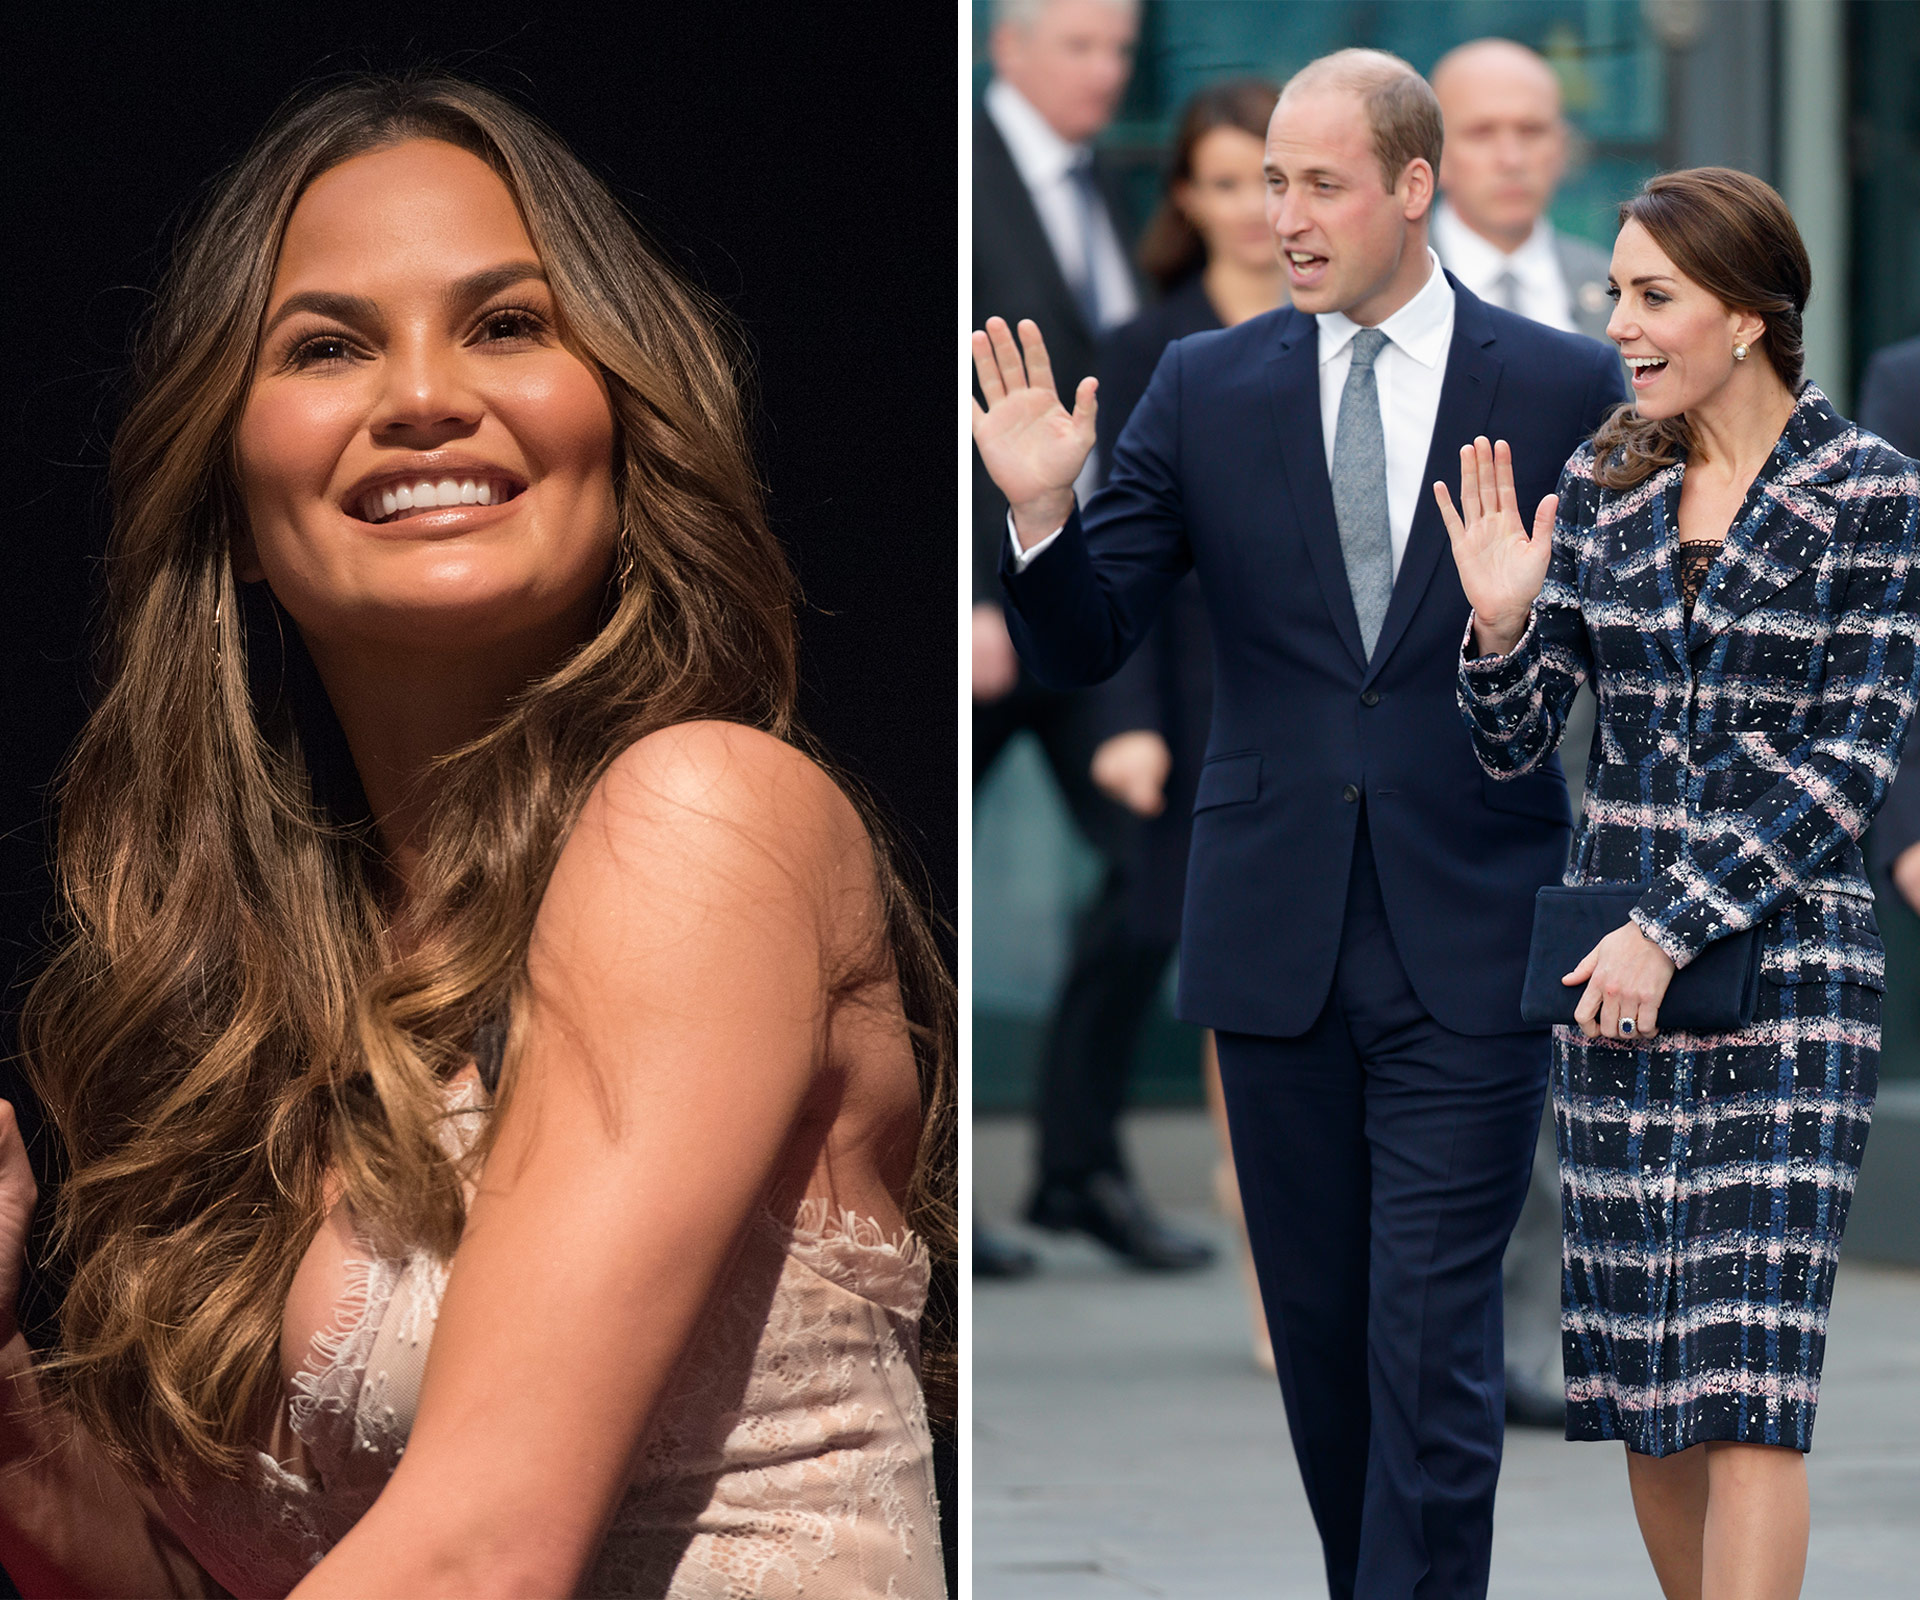 Chrissy Teigen and the Duke and Duchess of Cambridge